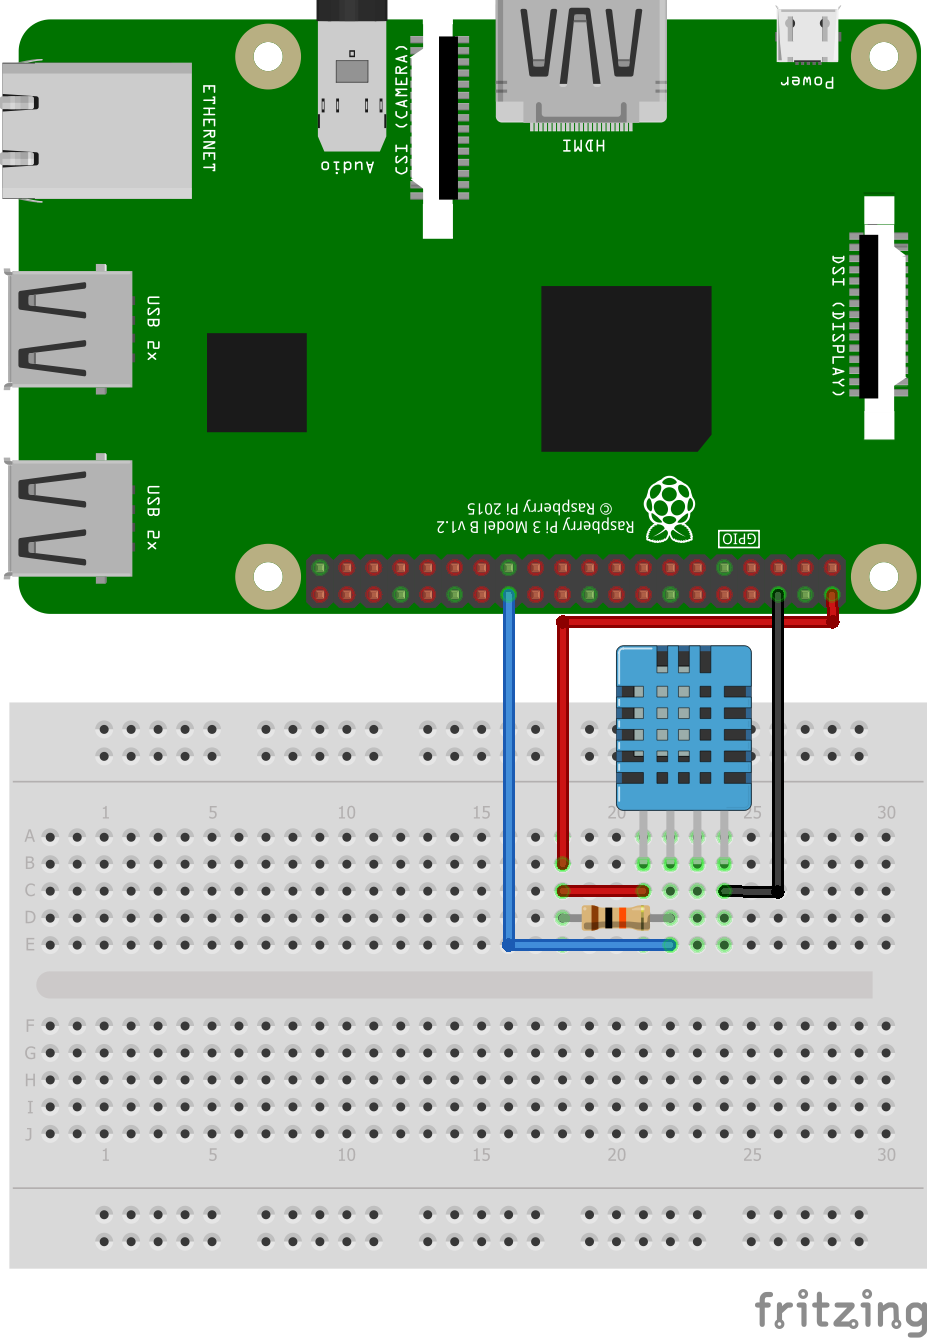 Circuit of DHT11 Temperature and Humidity Sensor in Raspberry Pi